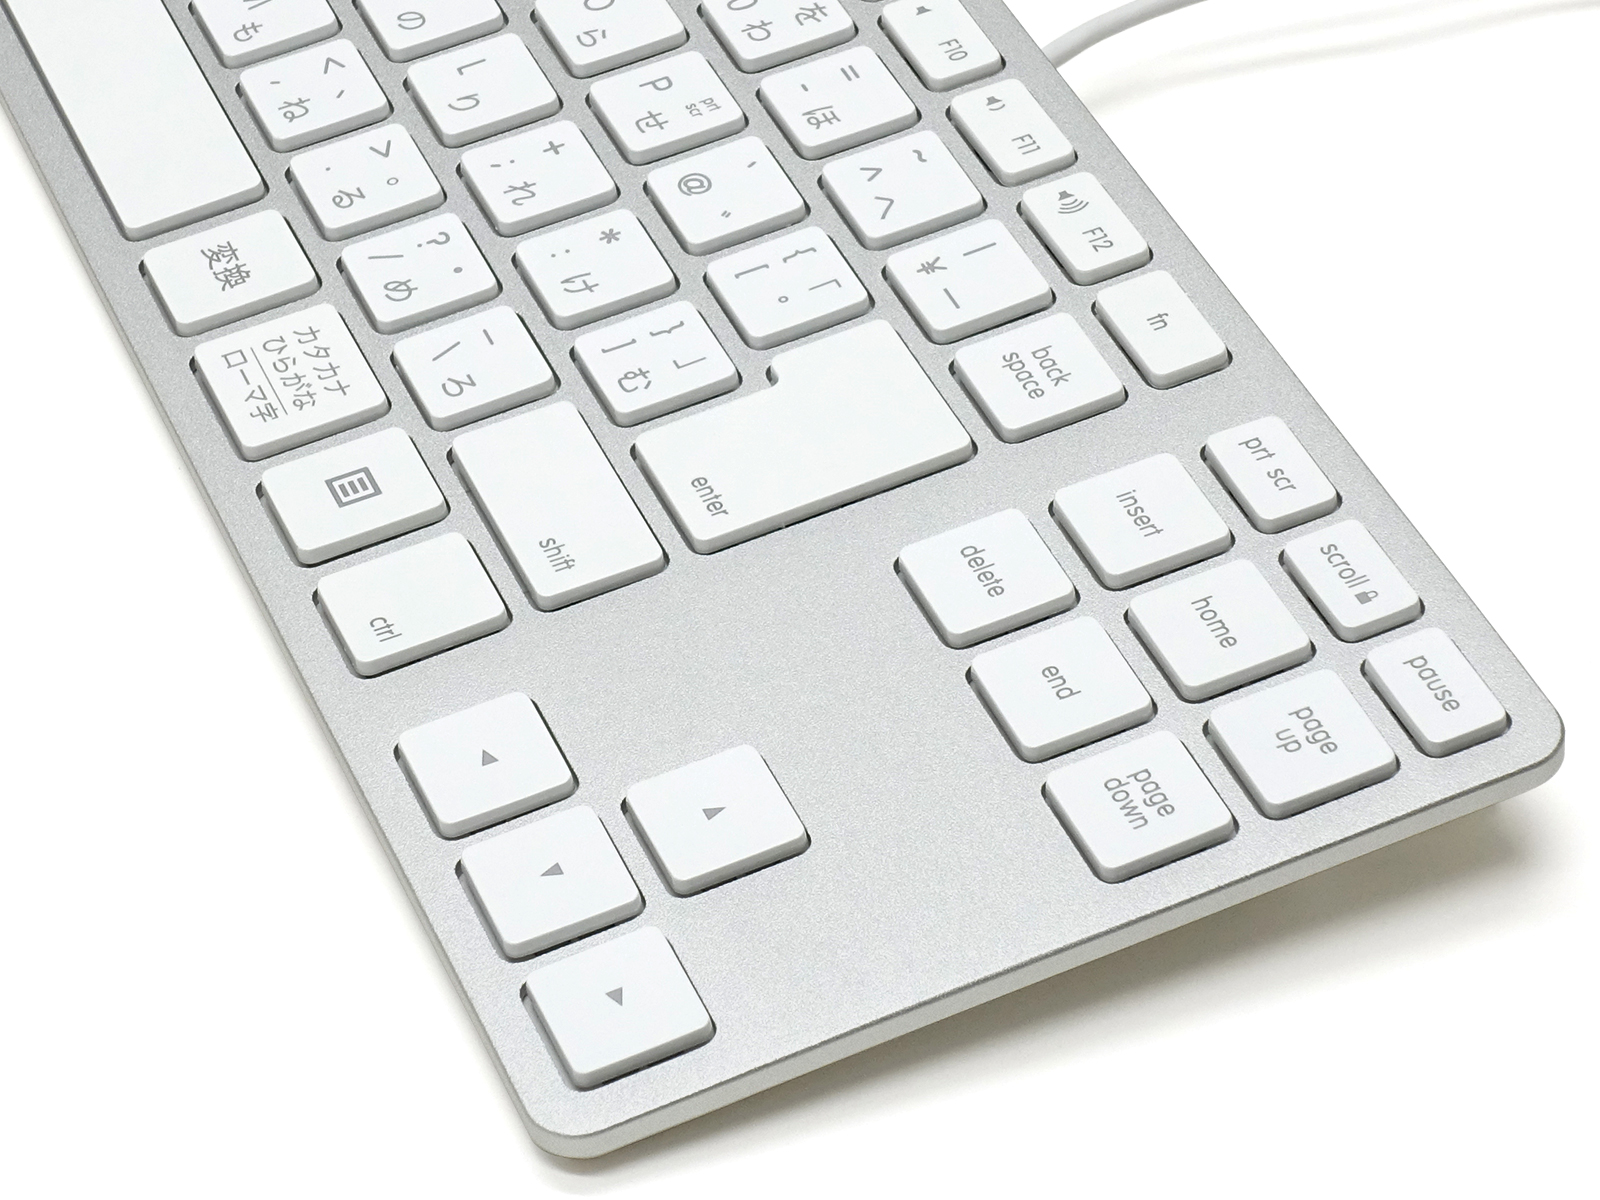 Matias Wired Aluminum Tenkeyless keyboard for PC: image 3 of 6 thumb